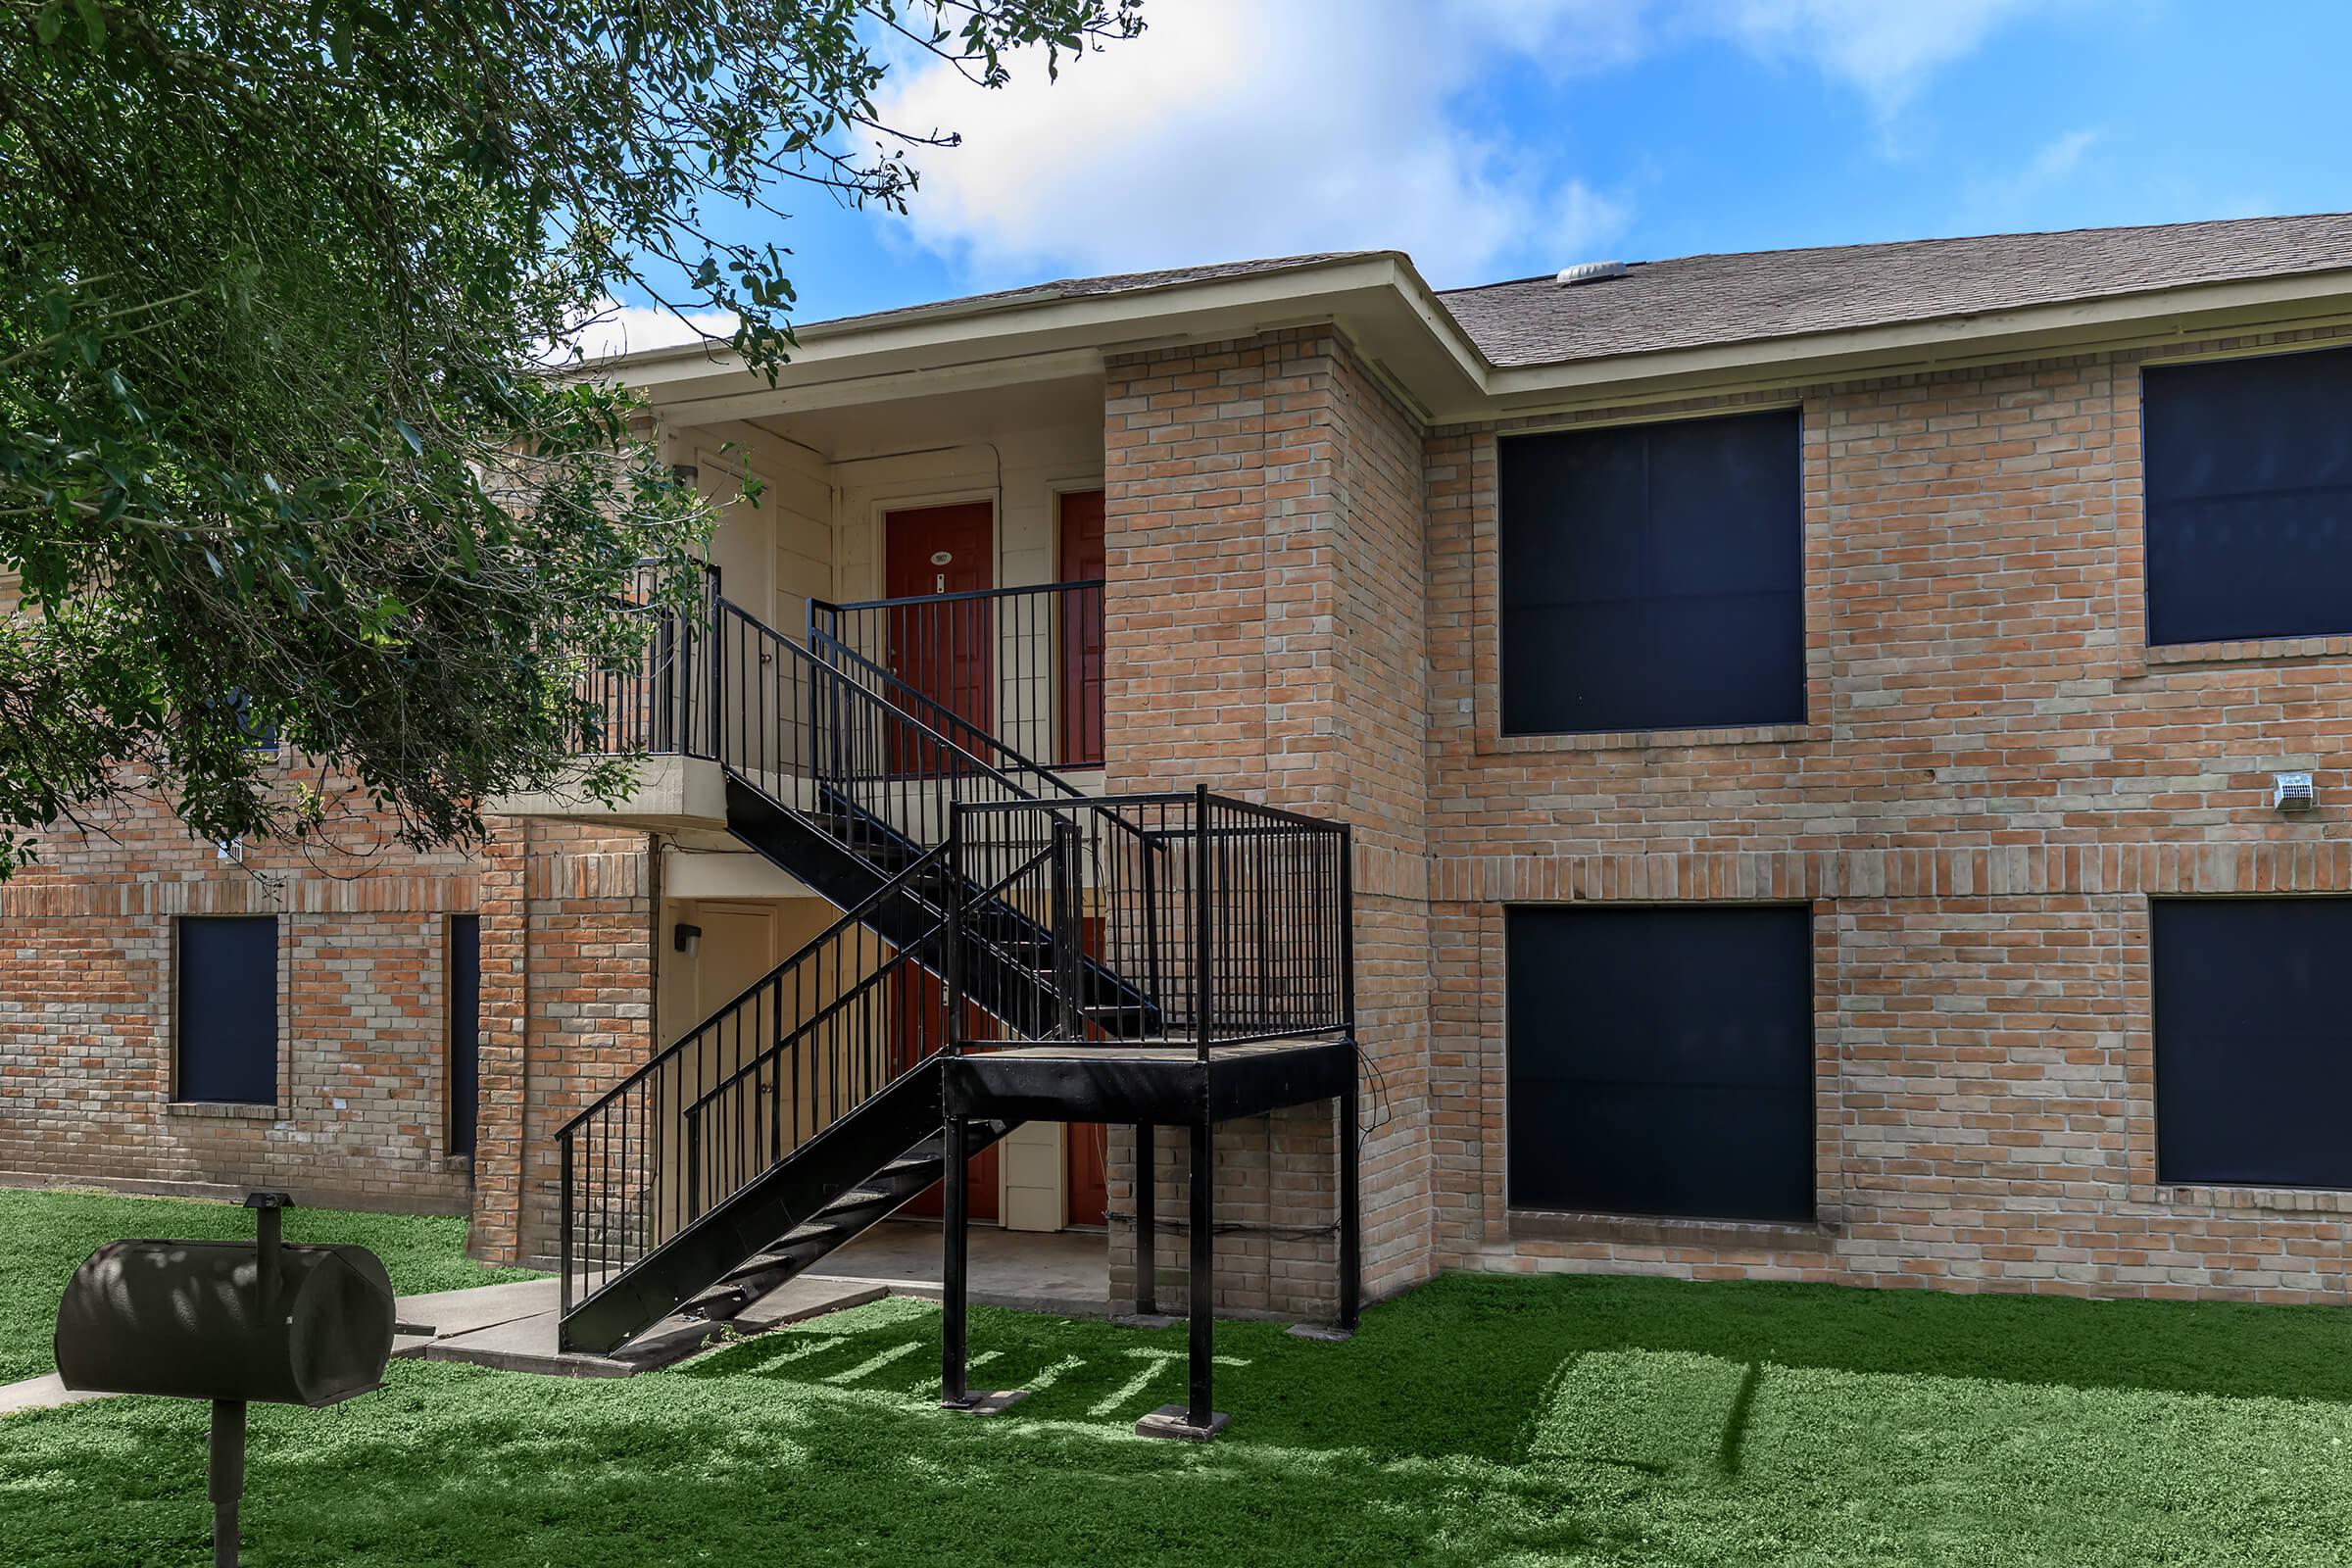 YOUR NEW HOME AWAITS IN BEEVILLE, TEXAS